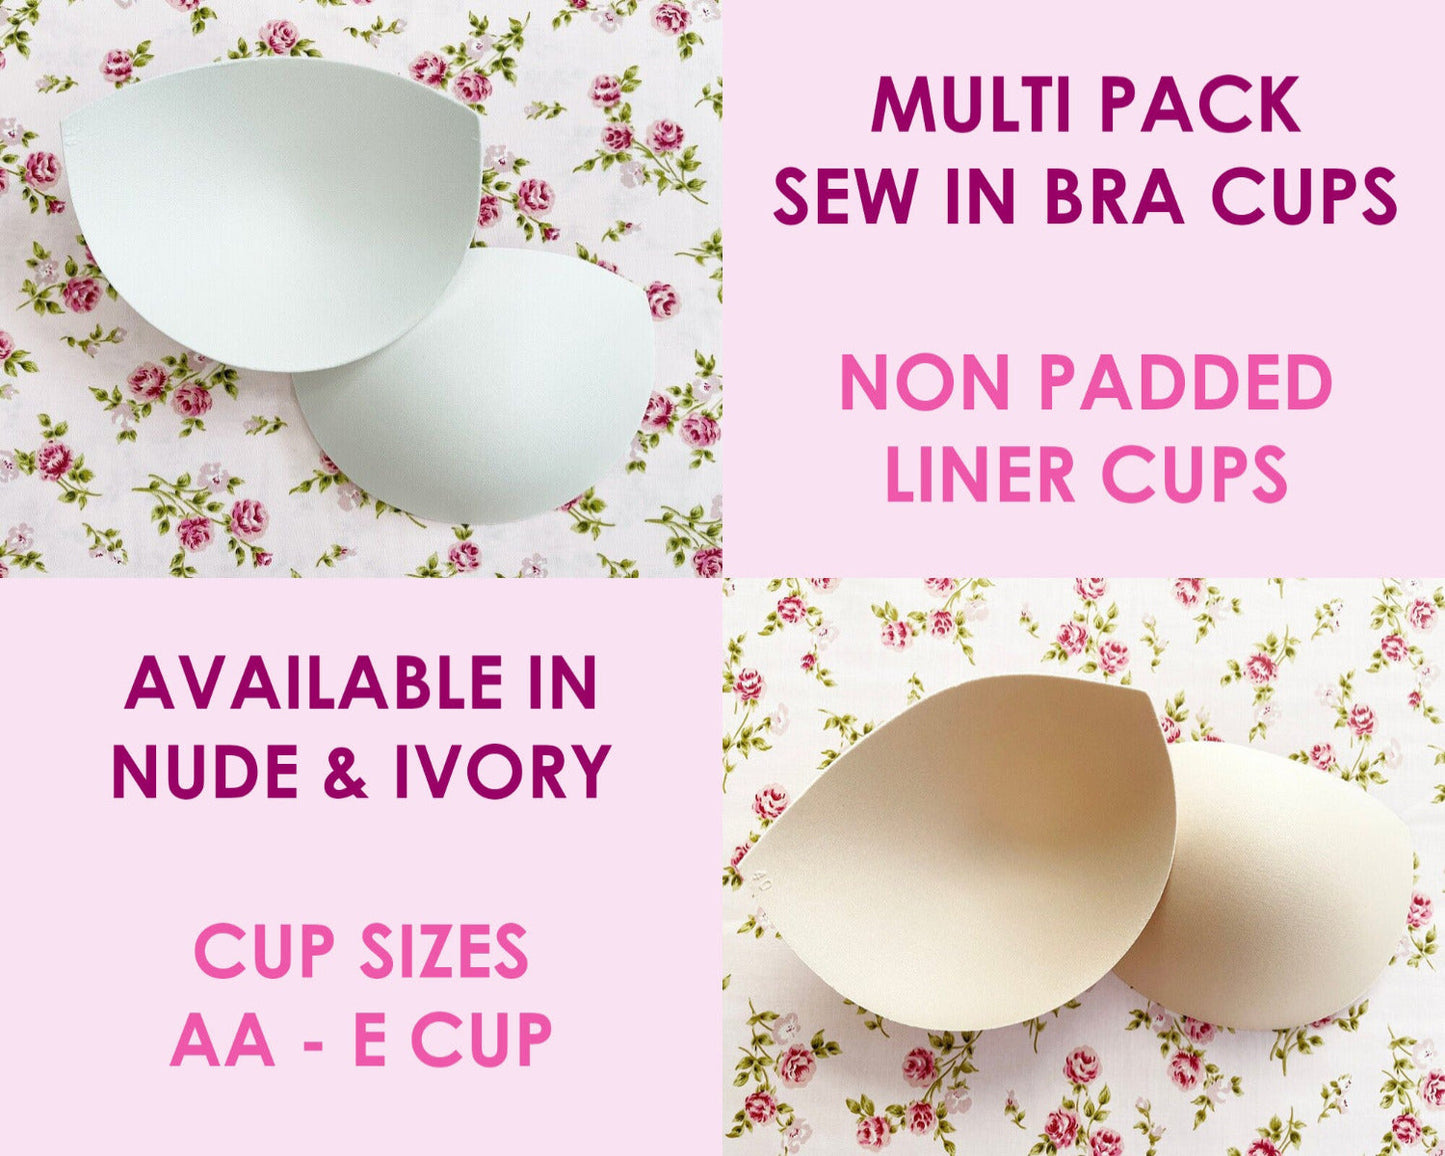 MULTI PACK - Sew in Bra Cups - Non Padded Liner Cups